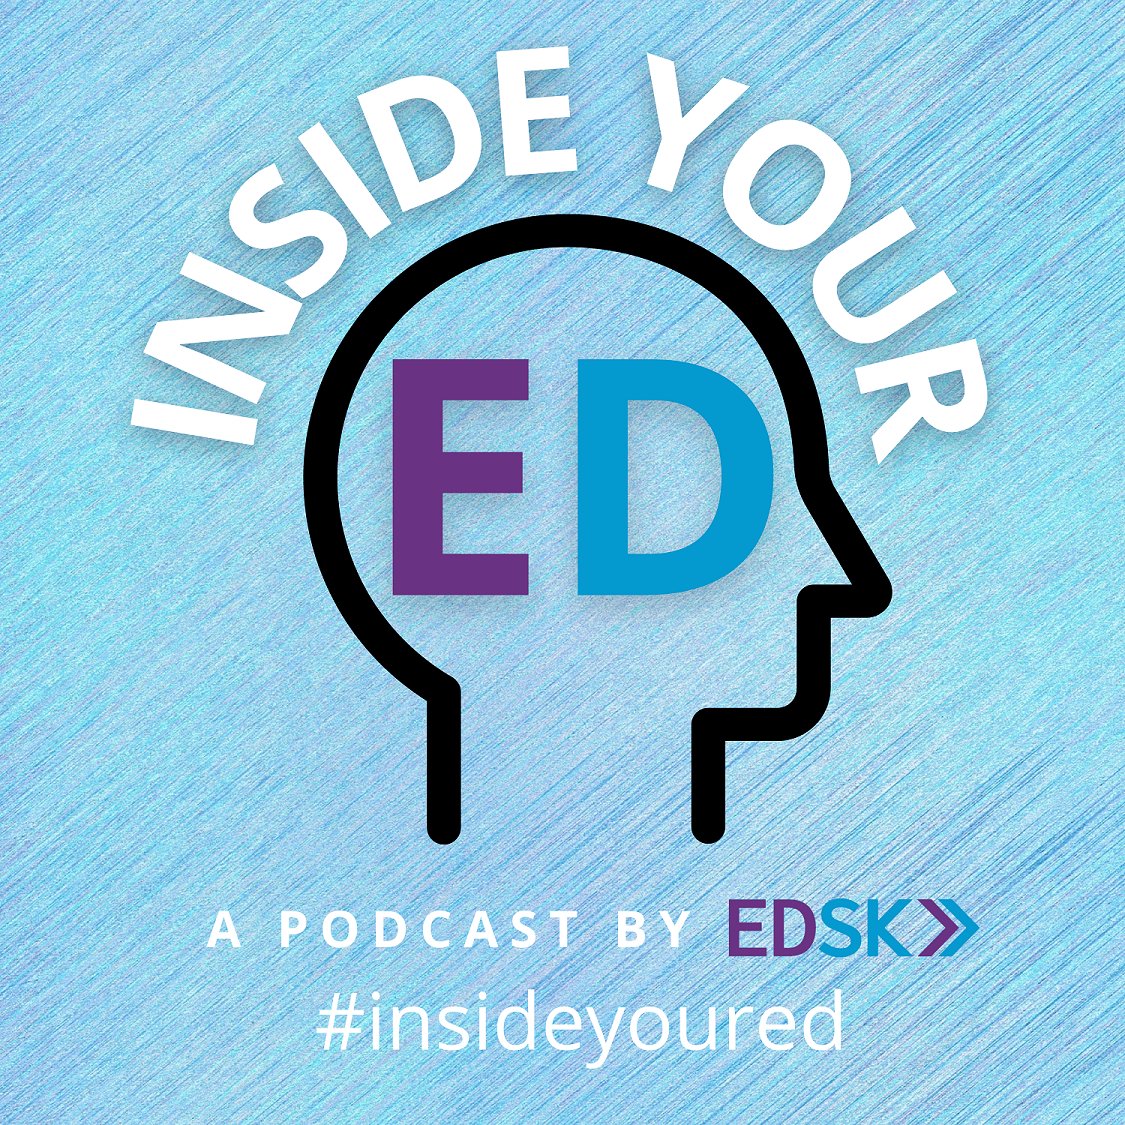 🚨NEW PODCAST EPISODE🚨 Do we all agree on what 'fairness' means in education? @LoicMnzs and @MrJLauder joined us on #insideyoured to discuss Loic's new report on how teachers and policymakers should deliver 'fairness' and 'equity' in schools. edsk.org/inside-your-ed…